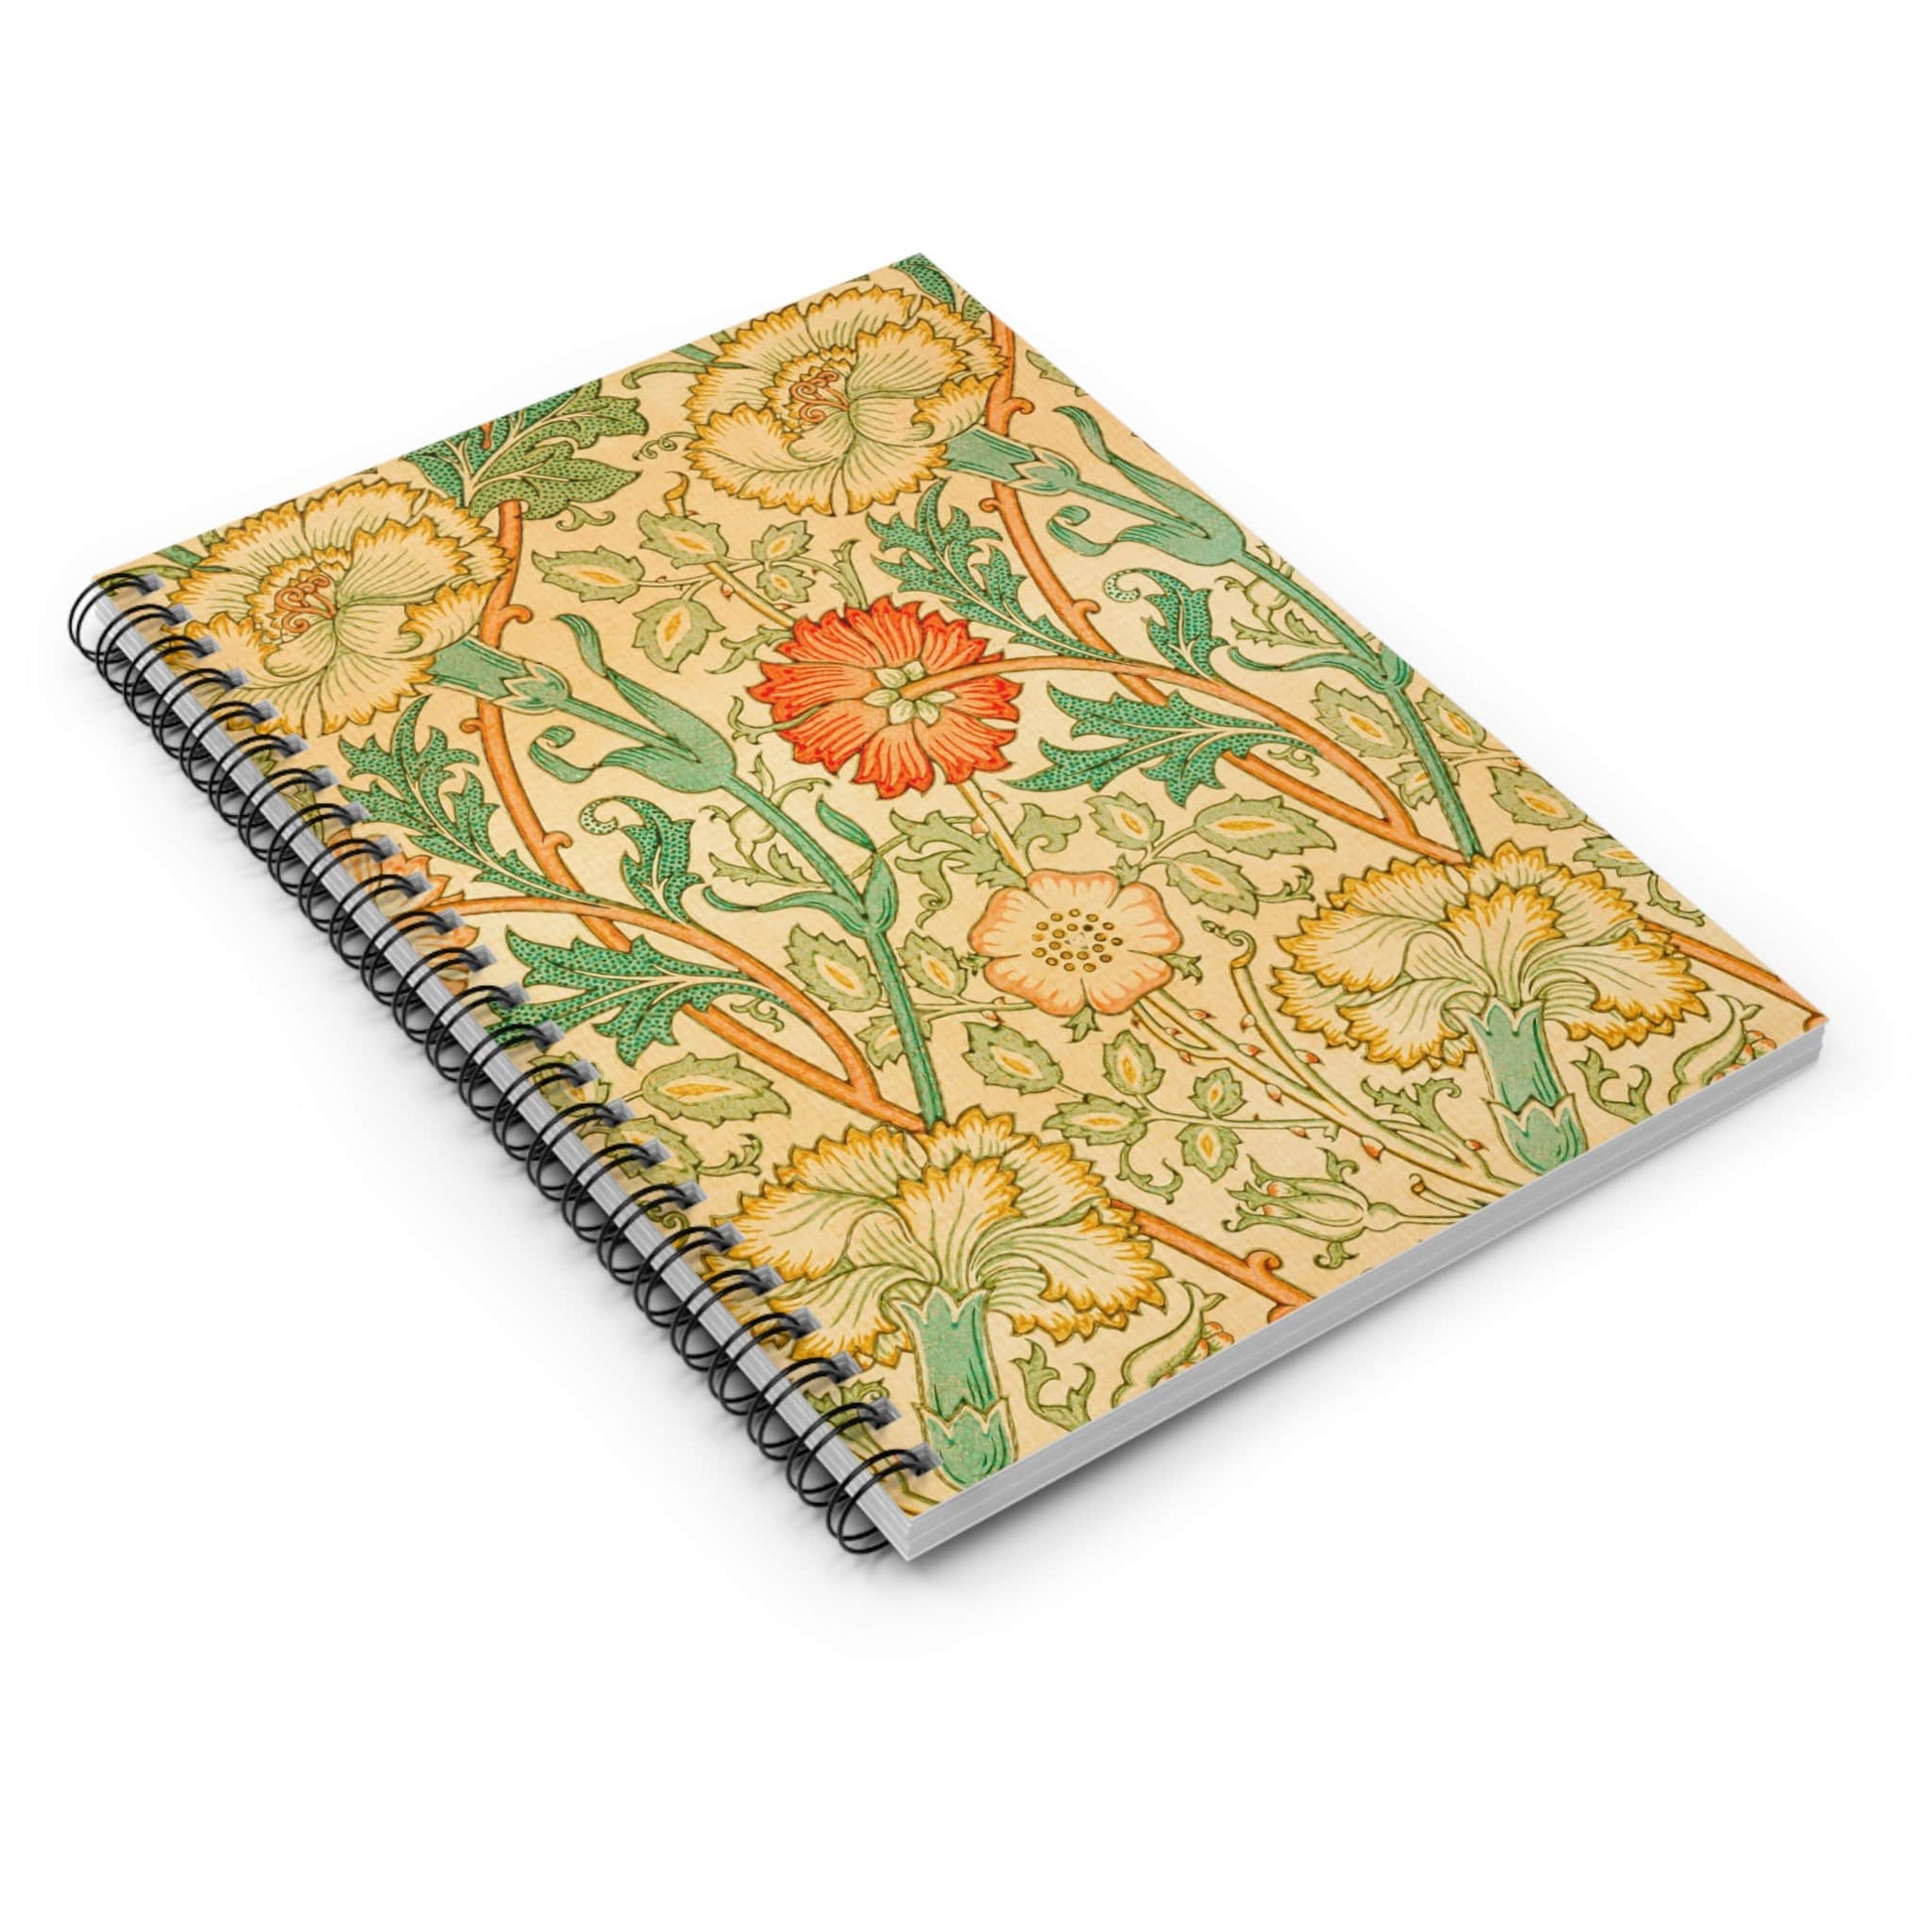 Antique Floral Pattern Spiral Notebook Laying Flat on White Surface